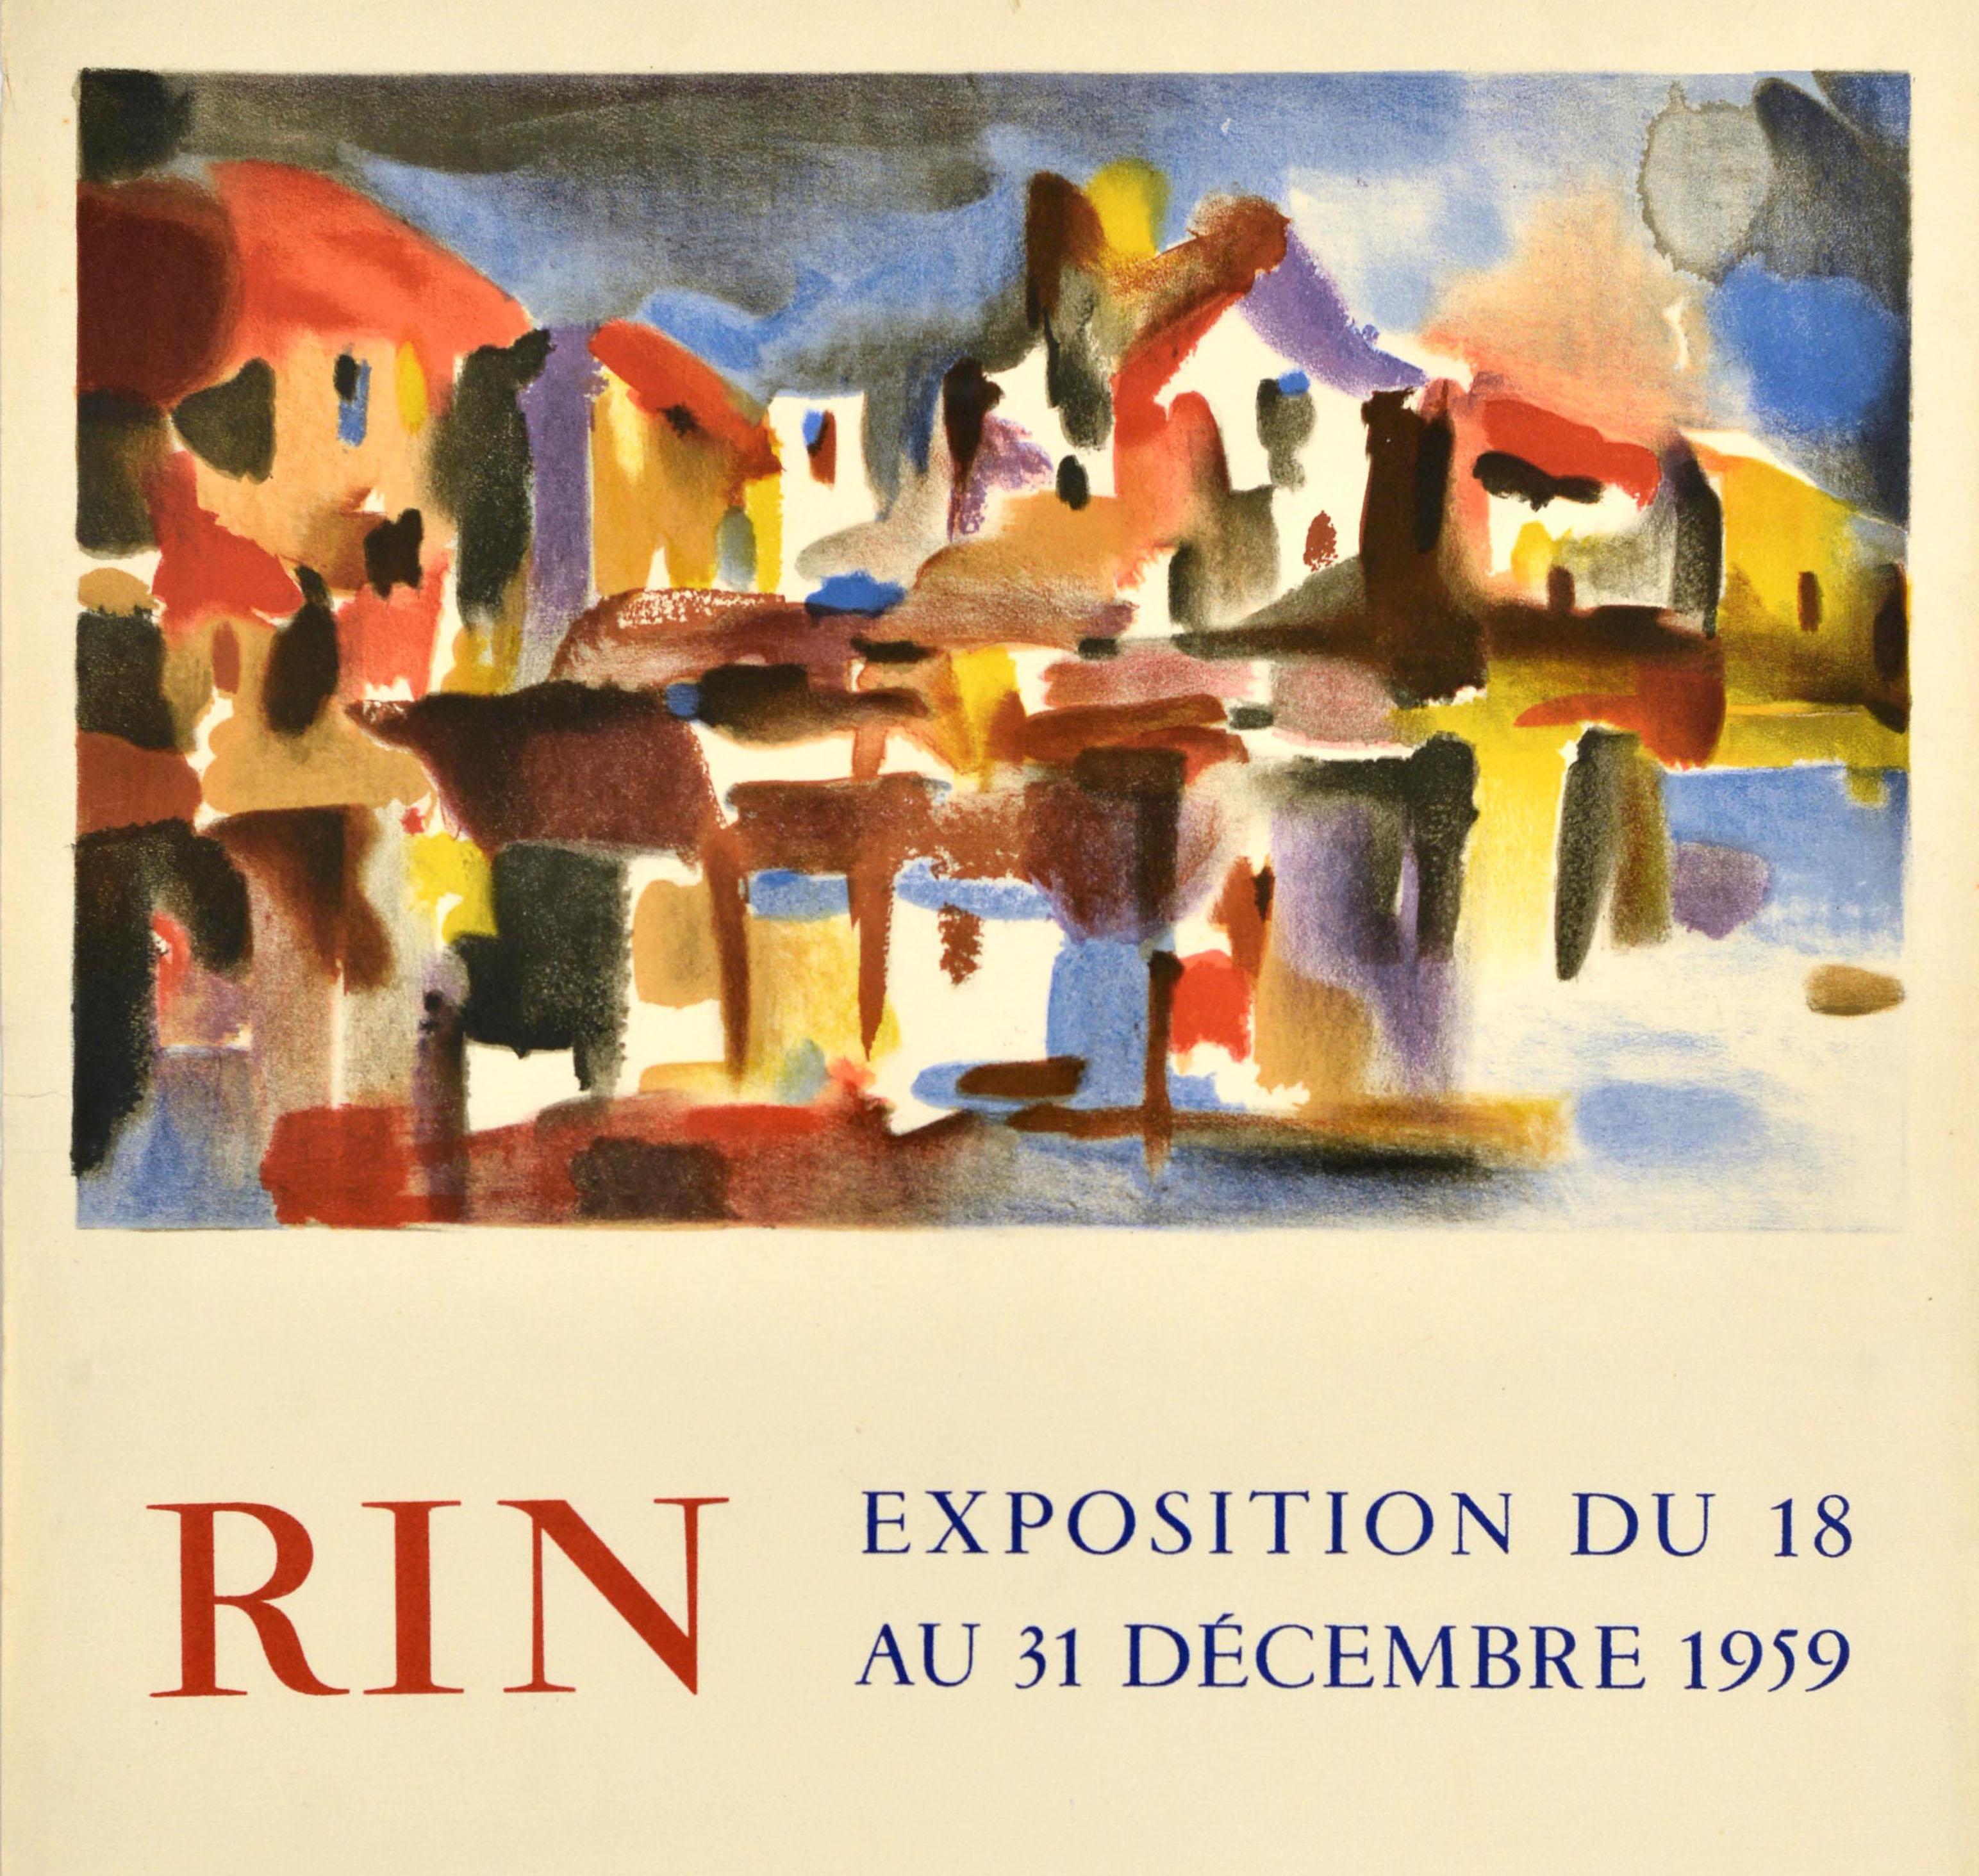 French Original Vintage Art Exhibition Poster Nicolas Rin Galerie Chardin Abstract For Sale